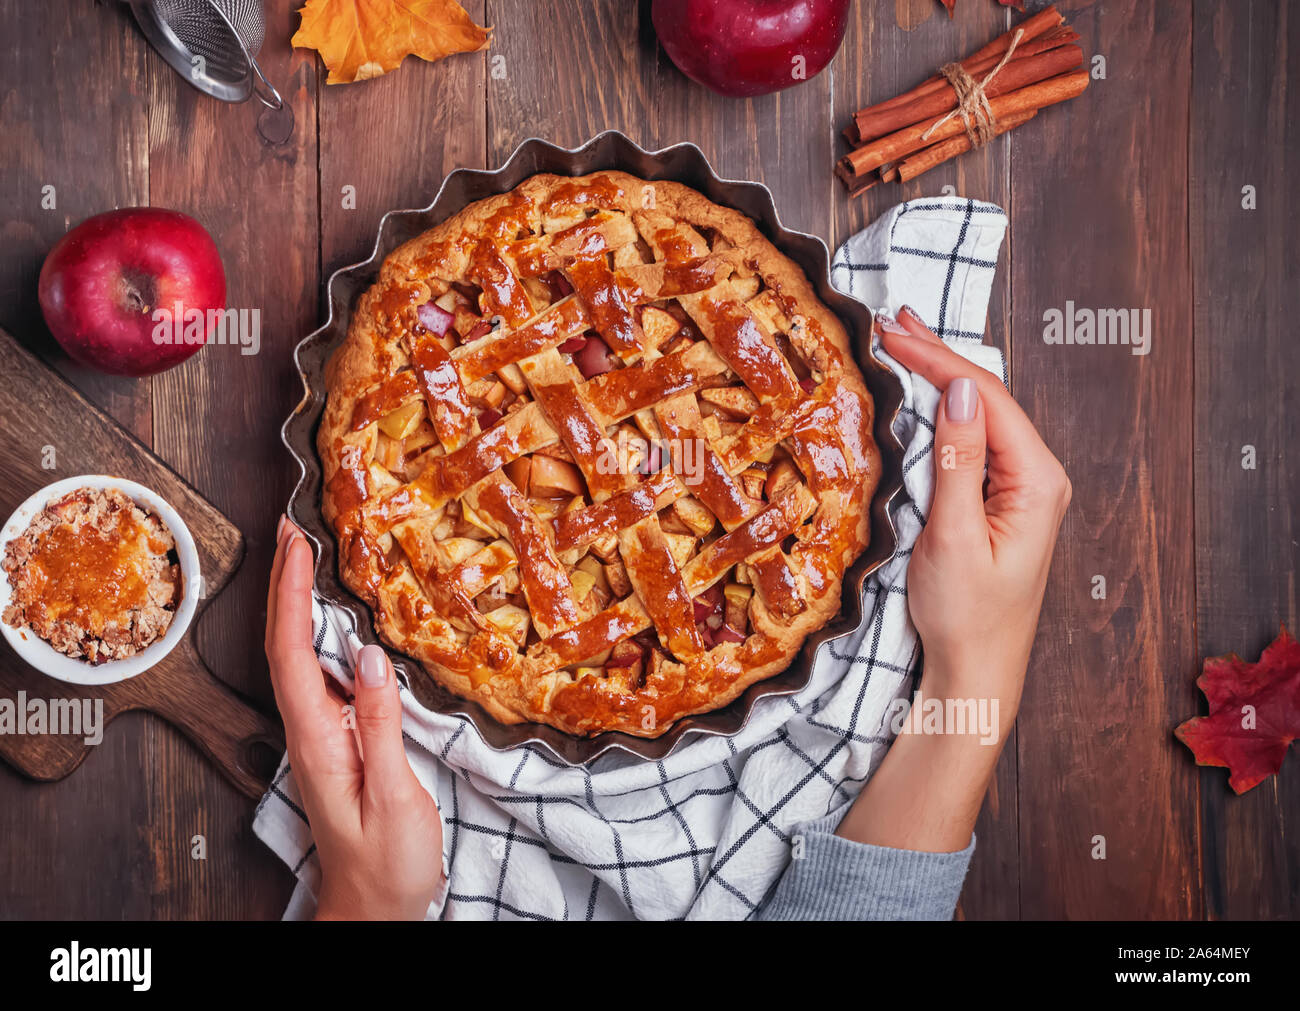 Woman's hands putting fresh baked apple pie on wooden table Stock Photo